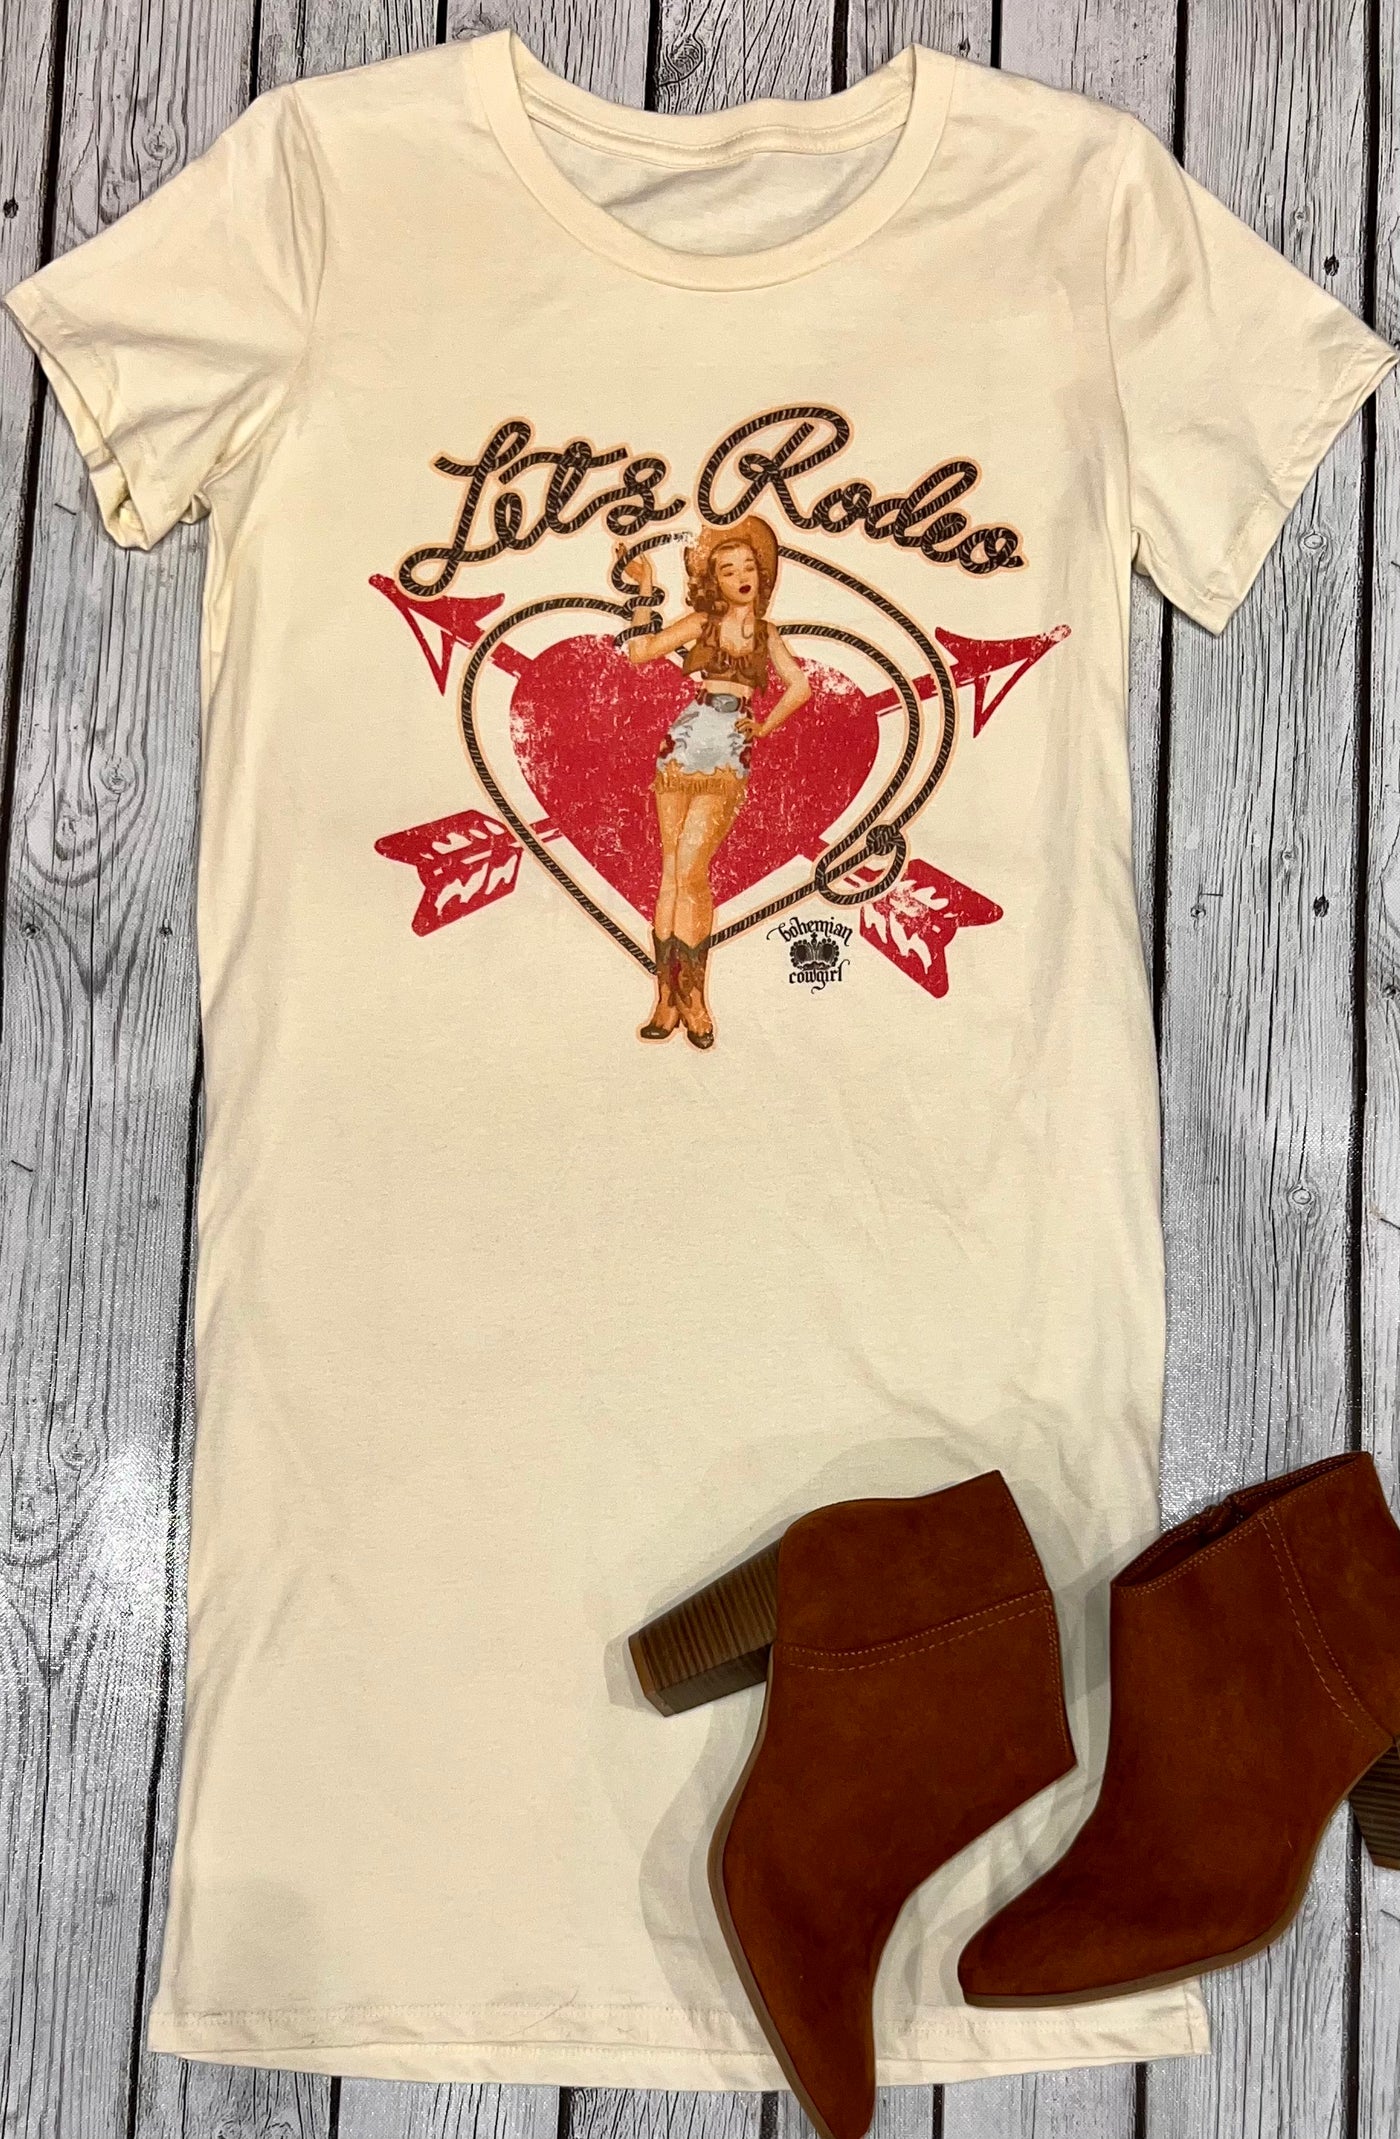 Let's Rodeo Cupid - T-shirt Dress